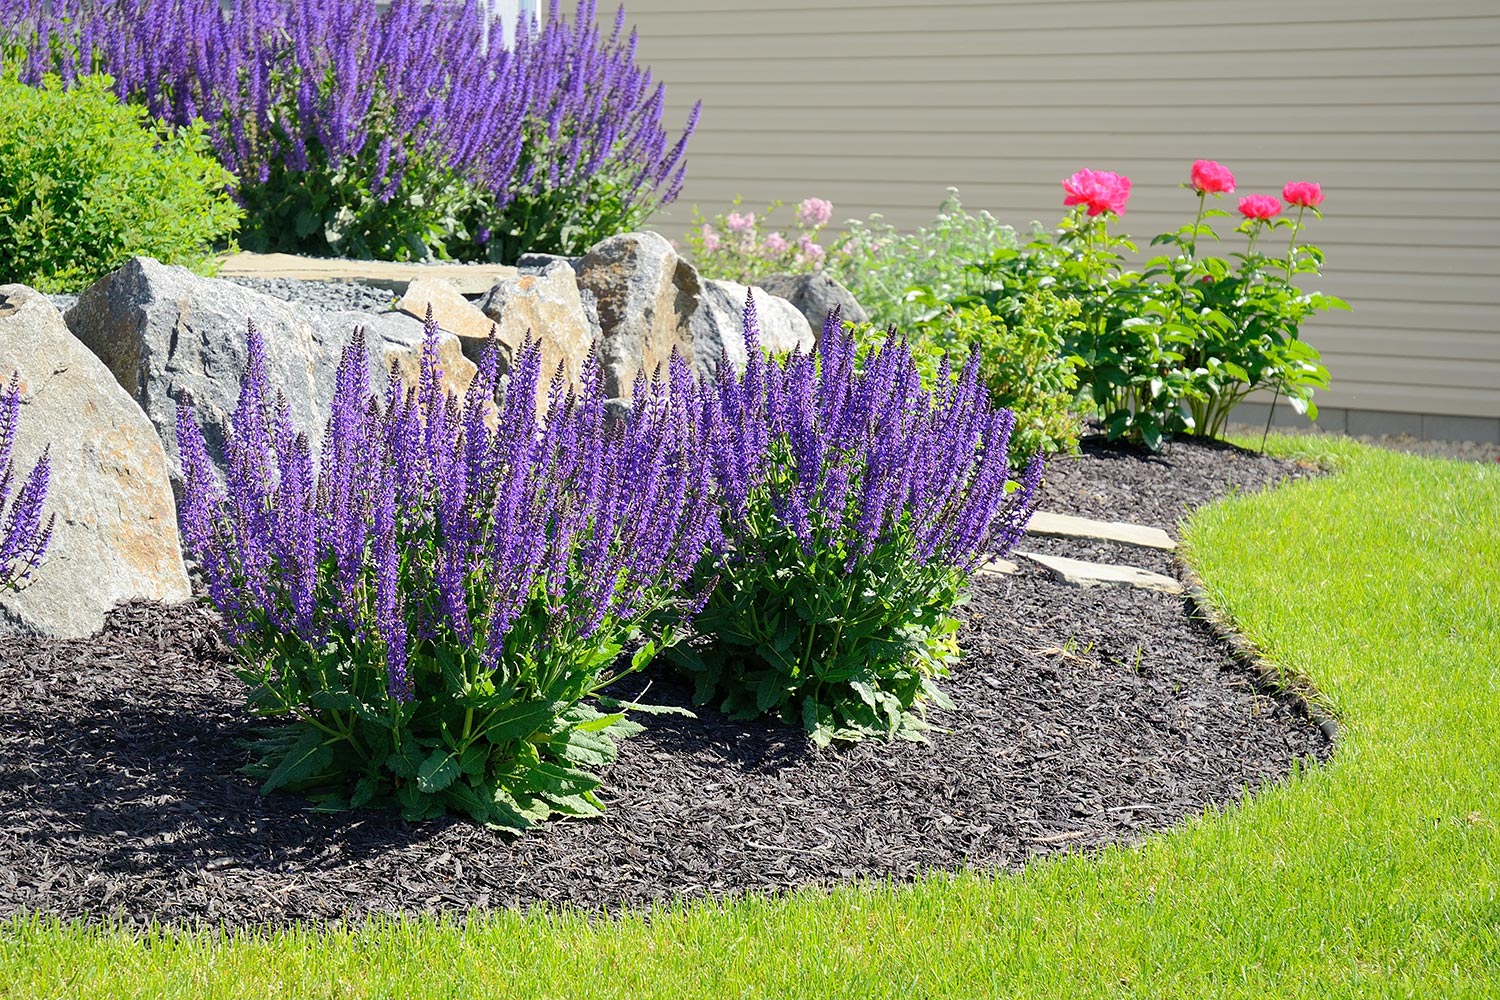 Salvia flowers and rock retaining wall at a residential home